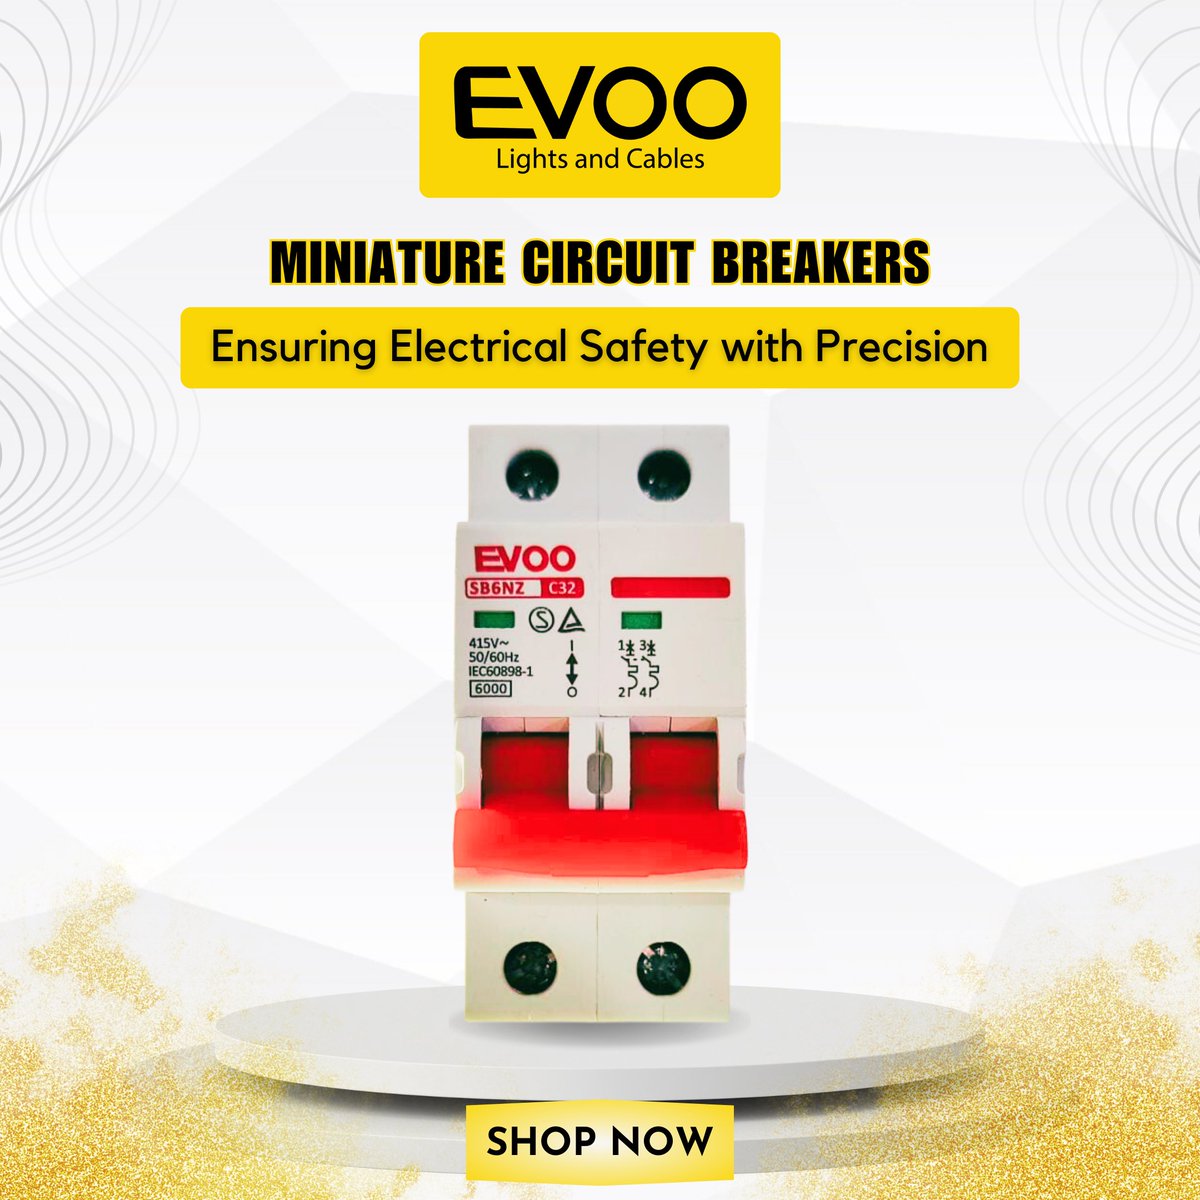 Upgrade Your Electrical Safety With EVOO Miniature Circuit Breakers!
.
Contact Us: 0329 8680000
.
#MCBs #SafetyFirst #ElectricalProtection